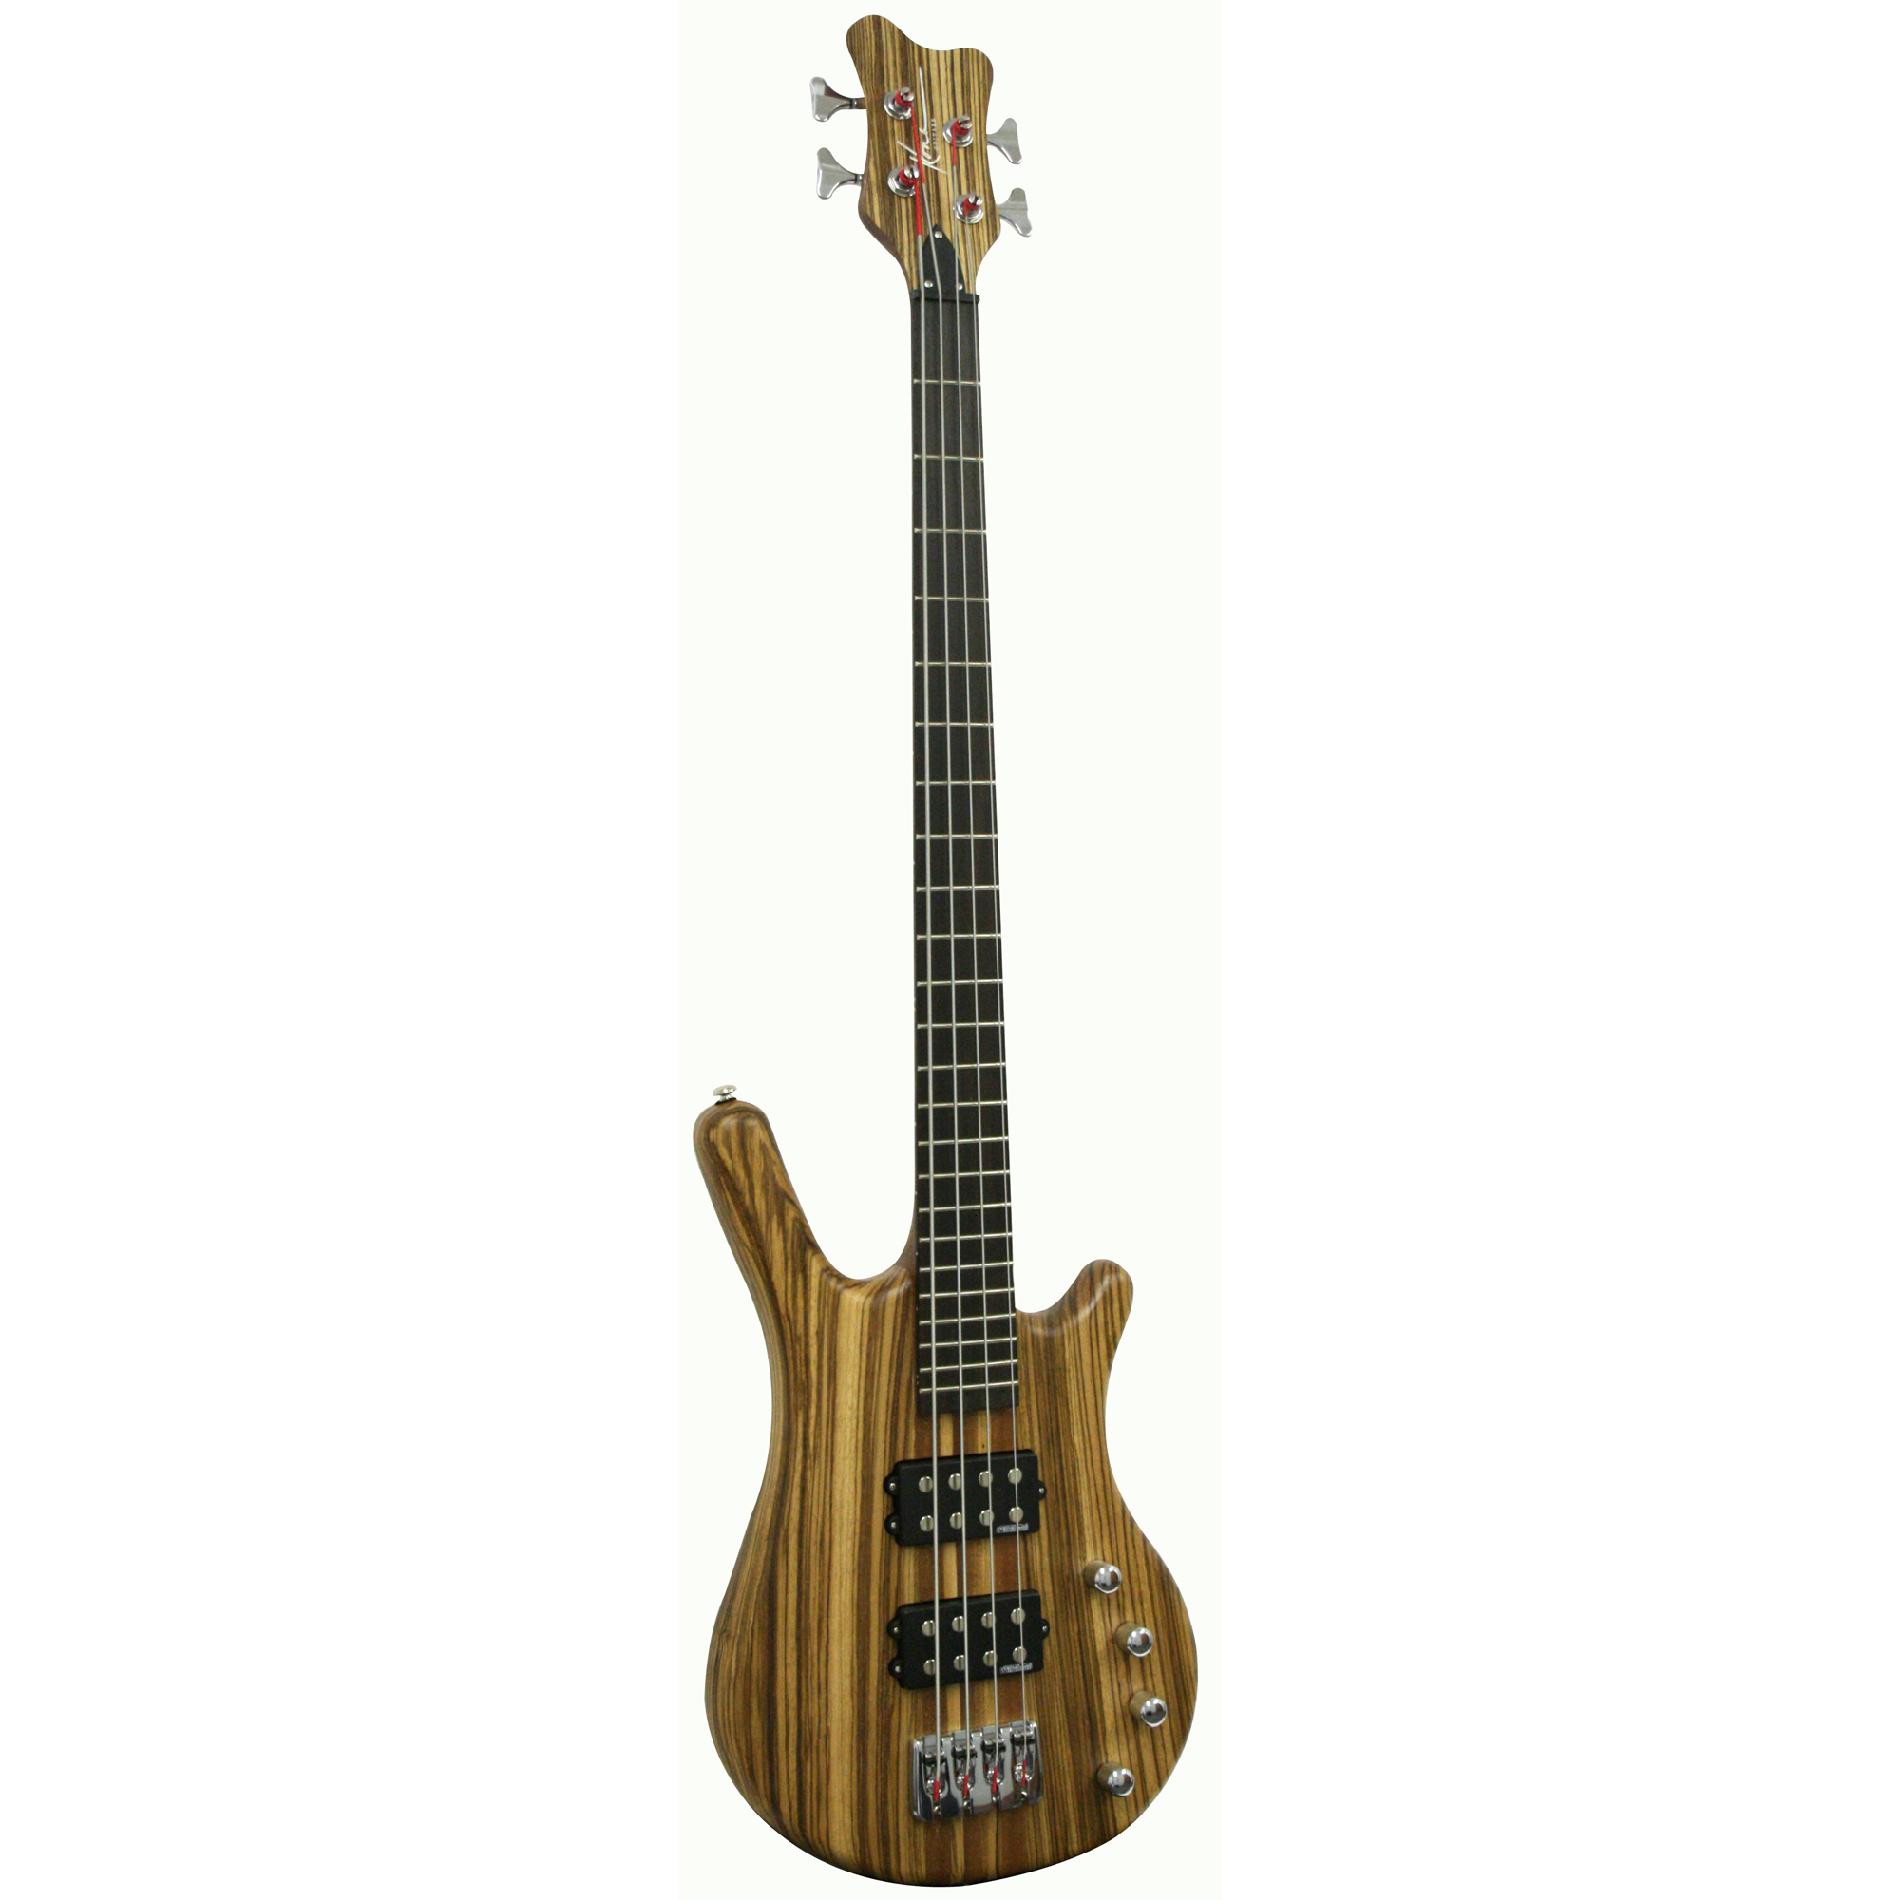 Kona 4 String Bass with Solid Wood Body